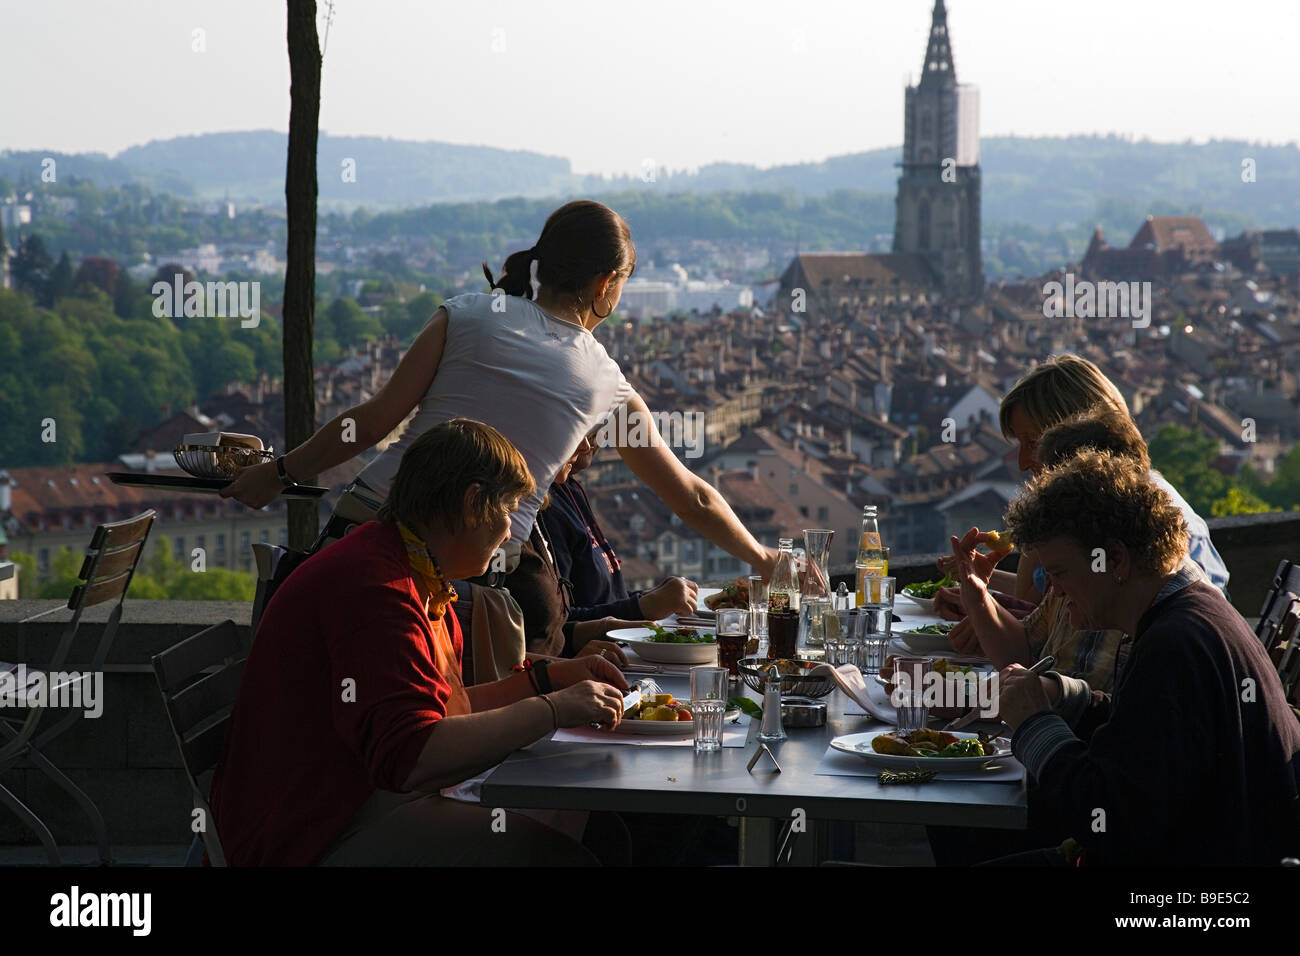 Guests enjoying meal in a restaurant with view over Old Town Rosengarten Berne Canton of Berne Switzerland Stock Photo